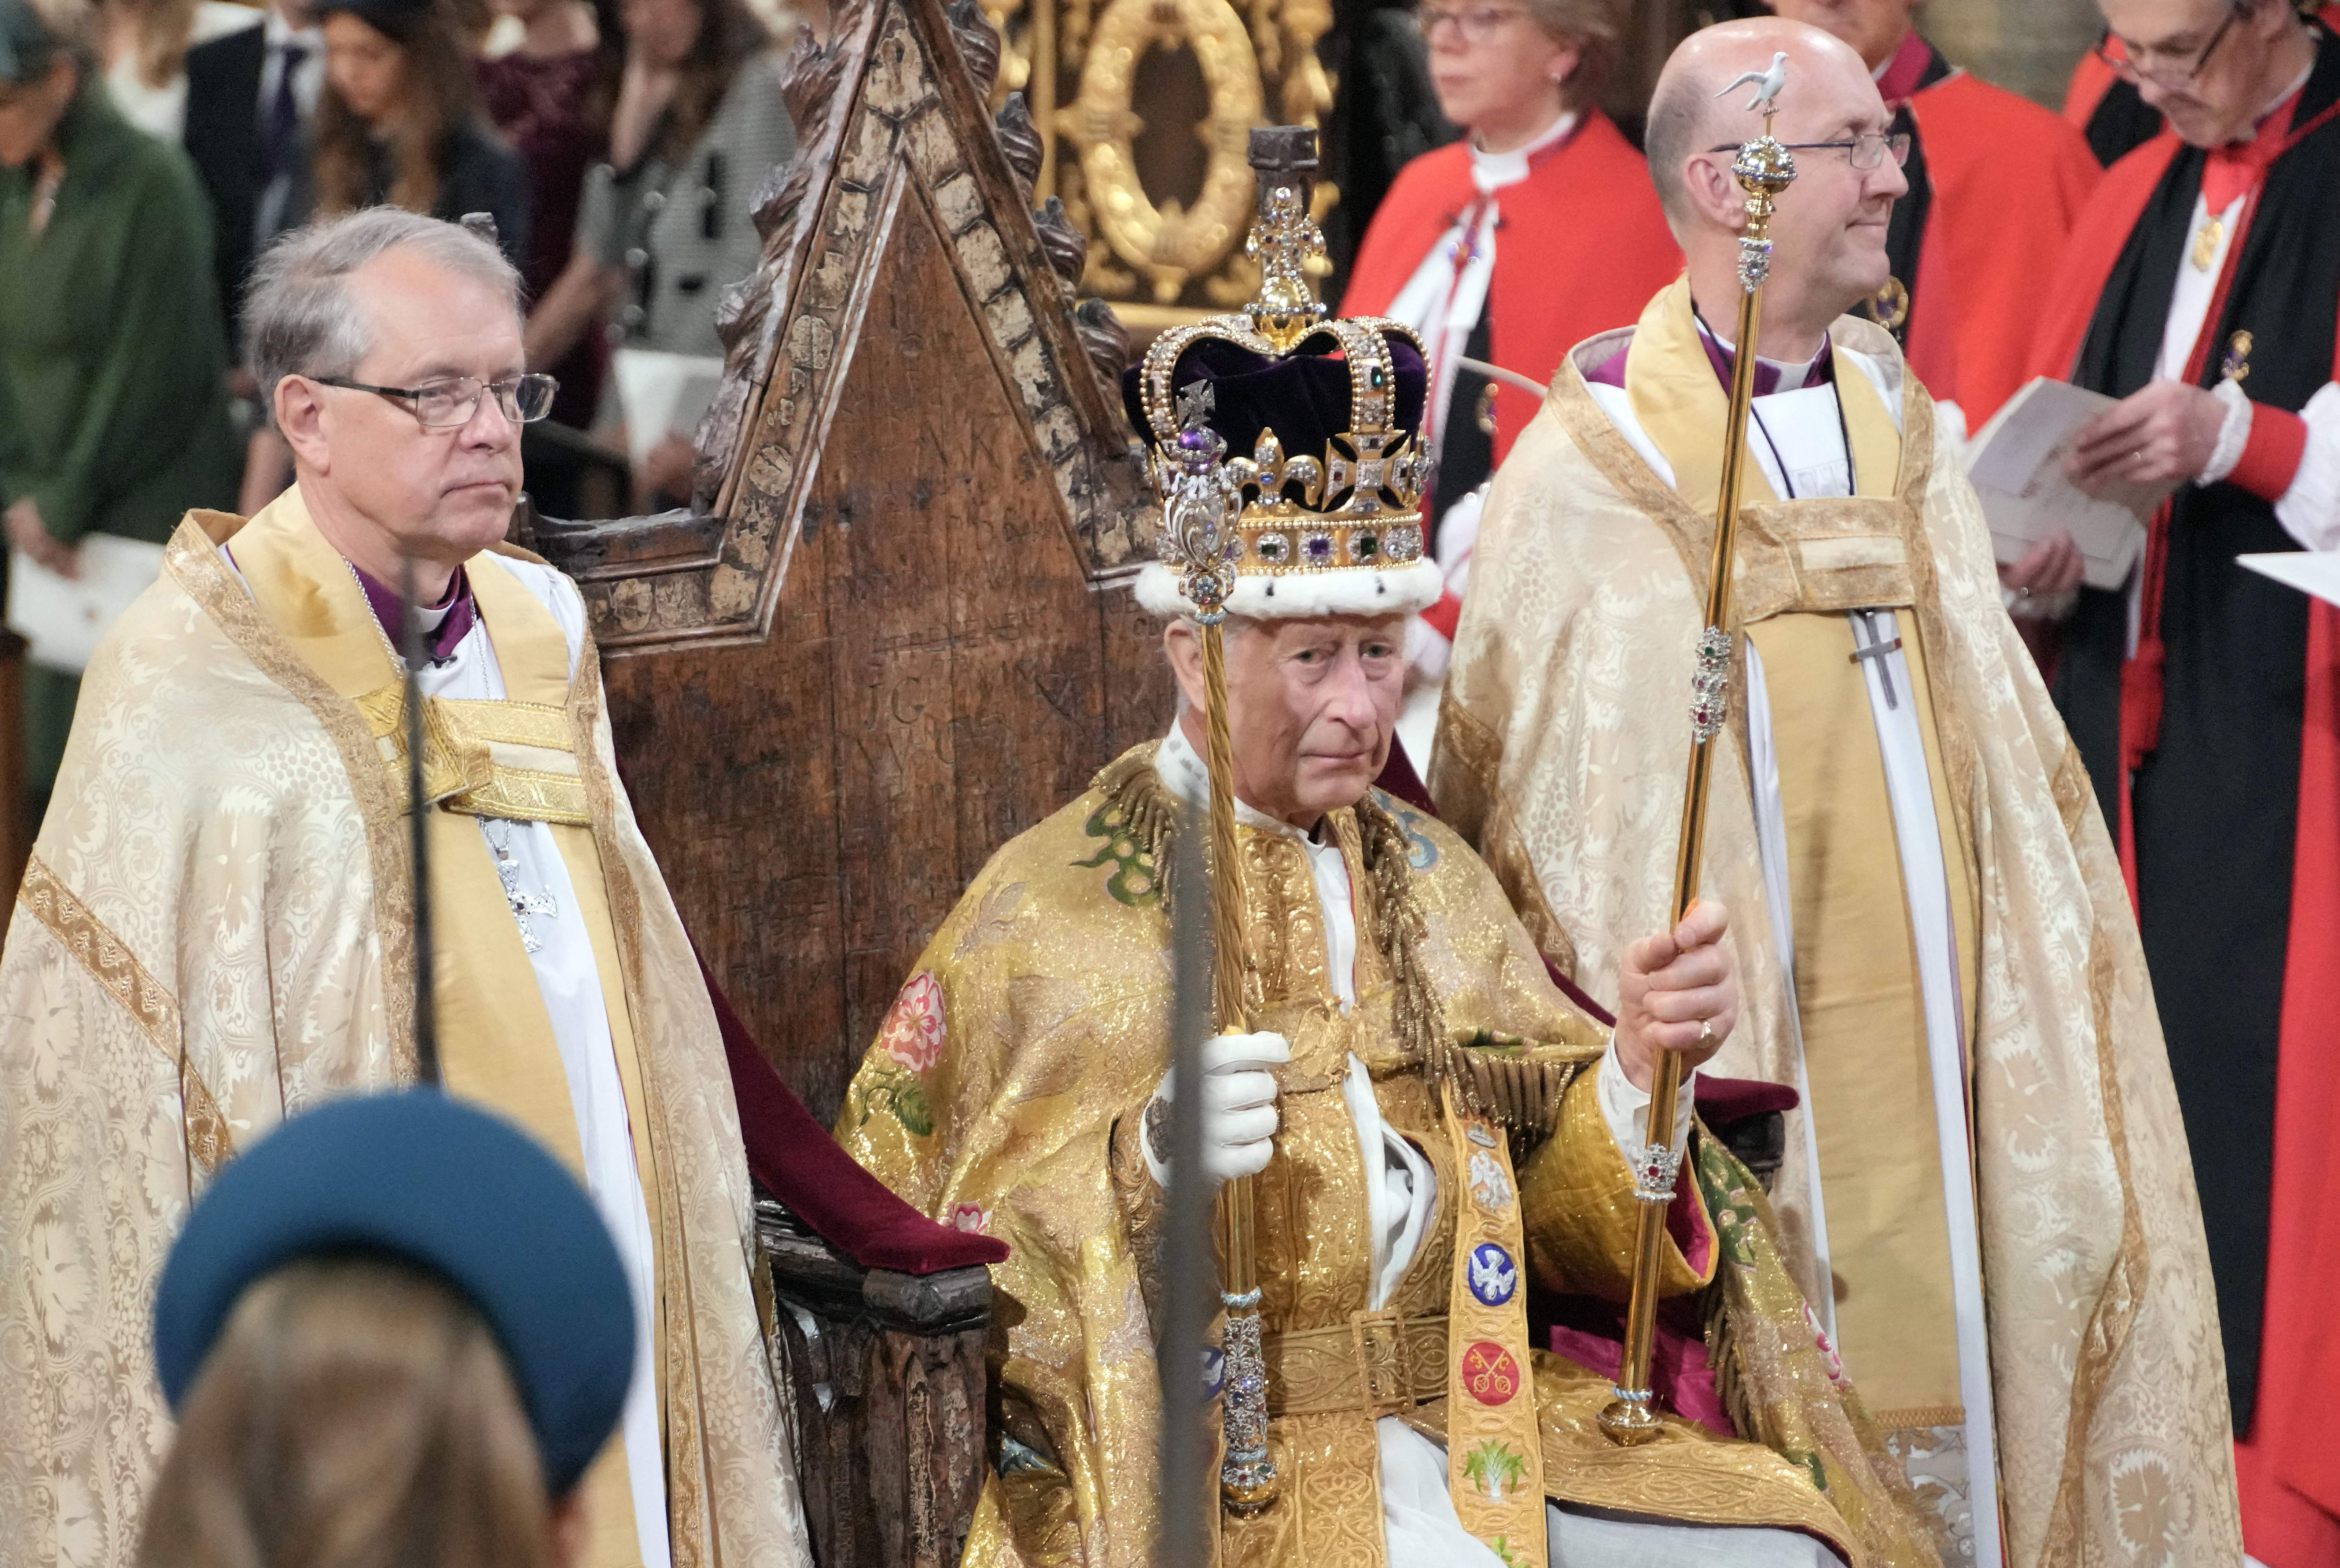 King Charles III sitting on his throne wearing St. Edward's crown during his Coronation ceremony inside Westminster Abbey on May 6, 2023 | Source: Getty Images